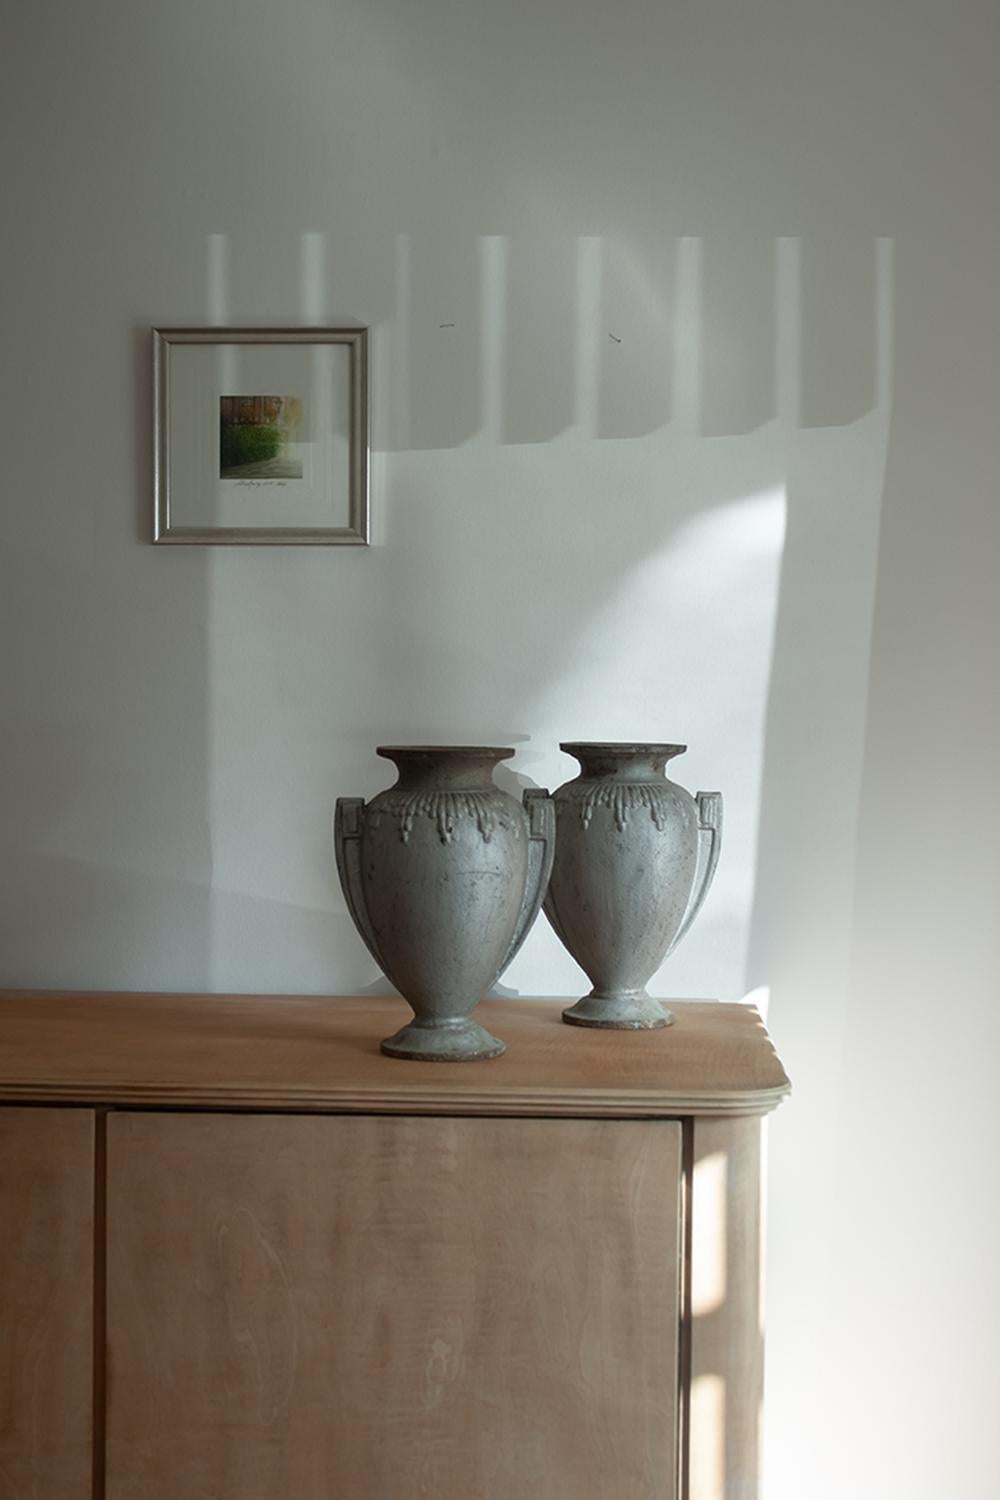 This pair of cast iron urns or vases are from the twentieth century. Sourced in the south of France, these stunning vases have a beautiful patina and uniquely cast shape. The vases show rust due to their age and outdoor use but are sure to add